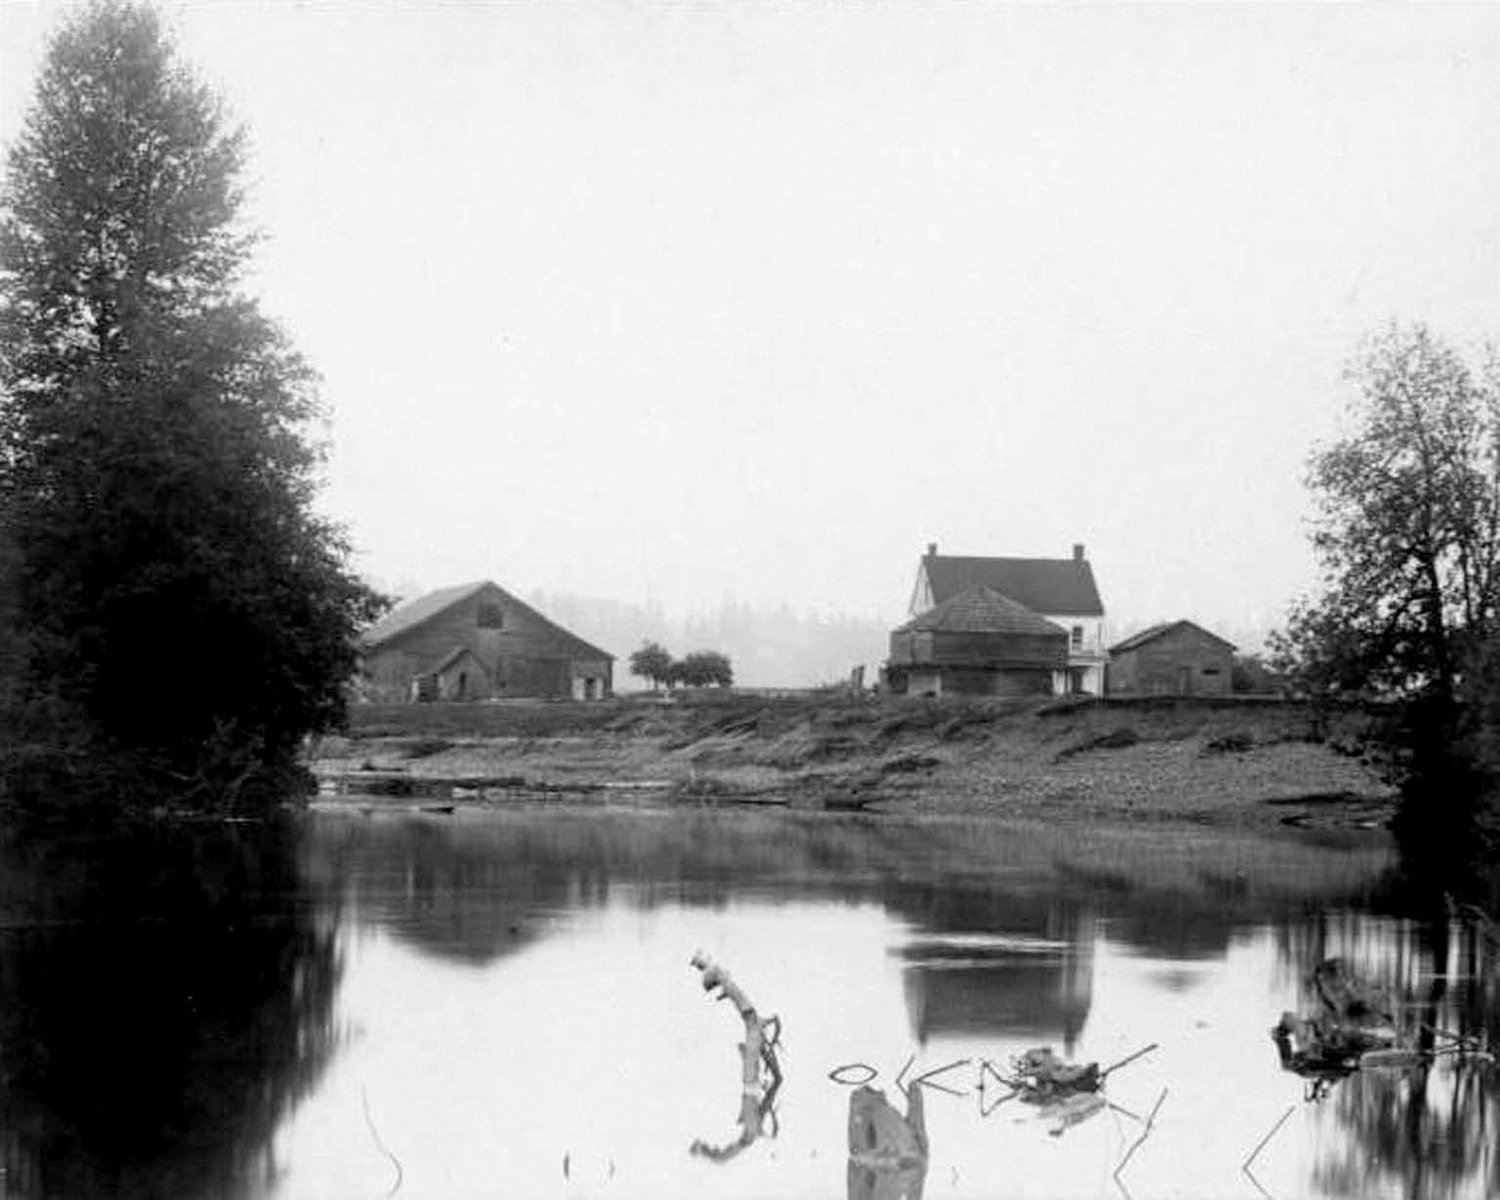 Borst house and blockhouse on banks of Chehalis River.